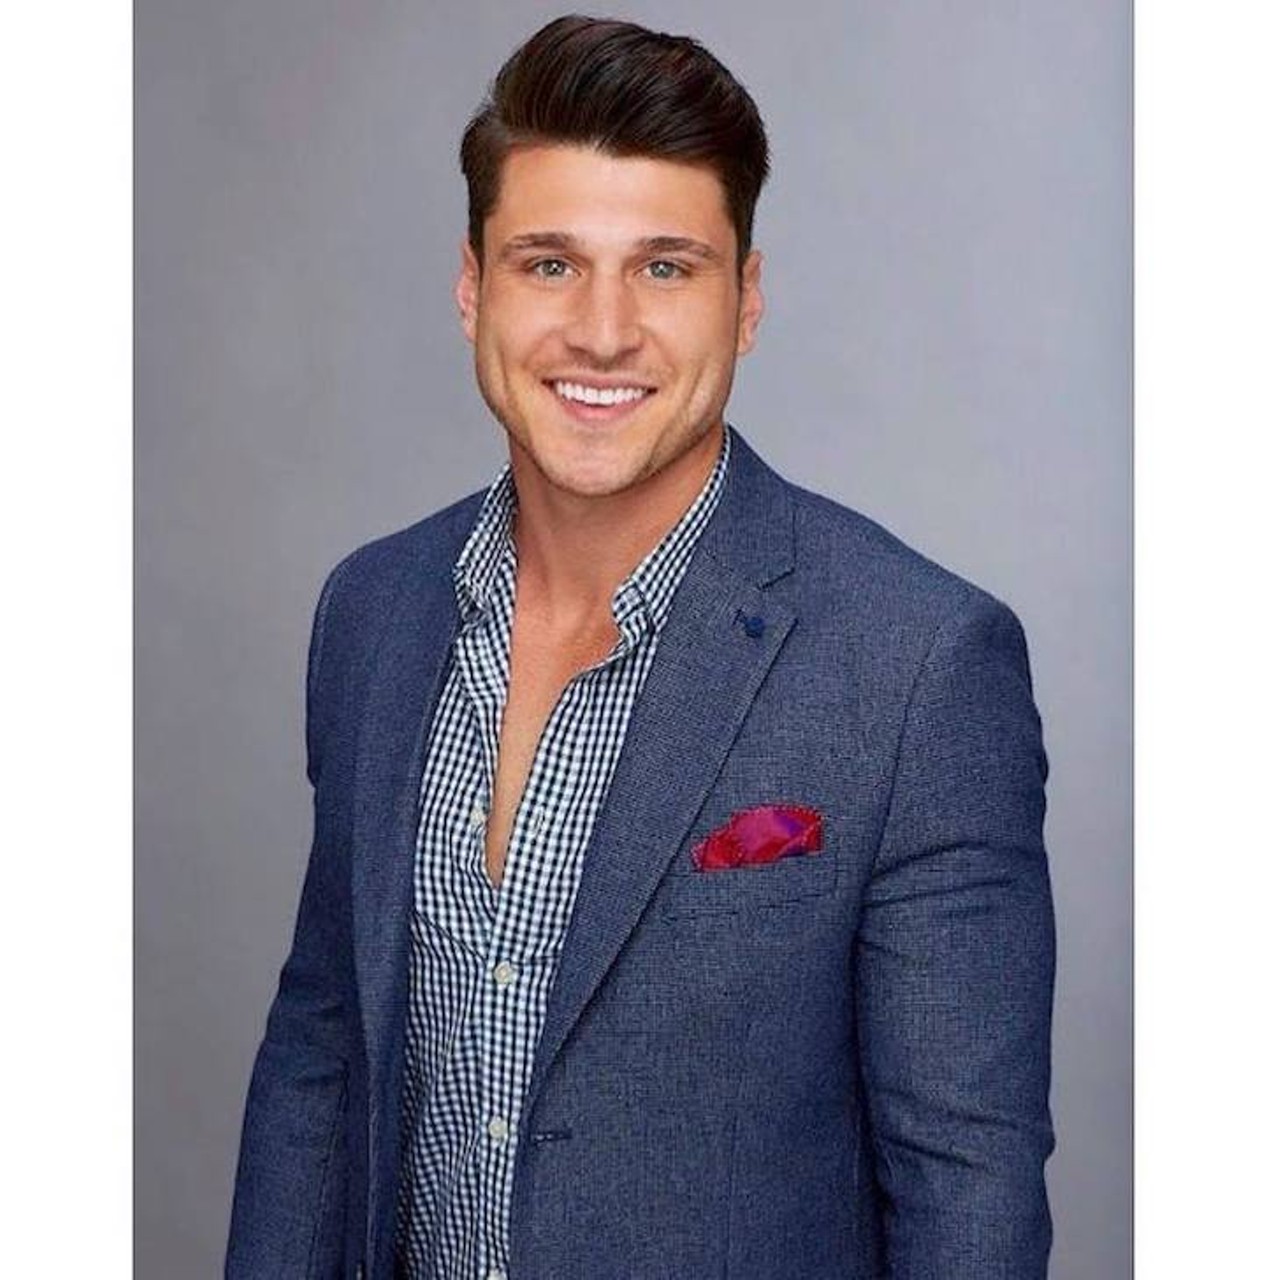 Connor Obrochta
Obrochta was a contestant on the 14th season of &#147;The Bachelorette.&#148; He was also on the fifth season of &#147;Bachelor in Paradise.&#148; Before he was breaking hearts on T.V., though, Obrochta played baseball at St. Petersburg Catholic high school and the University of Tampa.
Photo via Connor Obrochta&#146;s Facebook